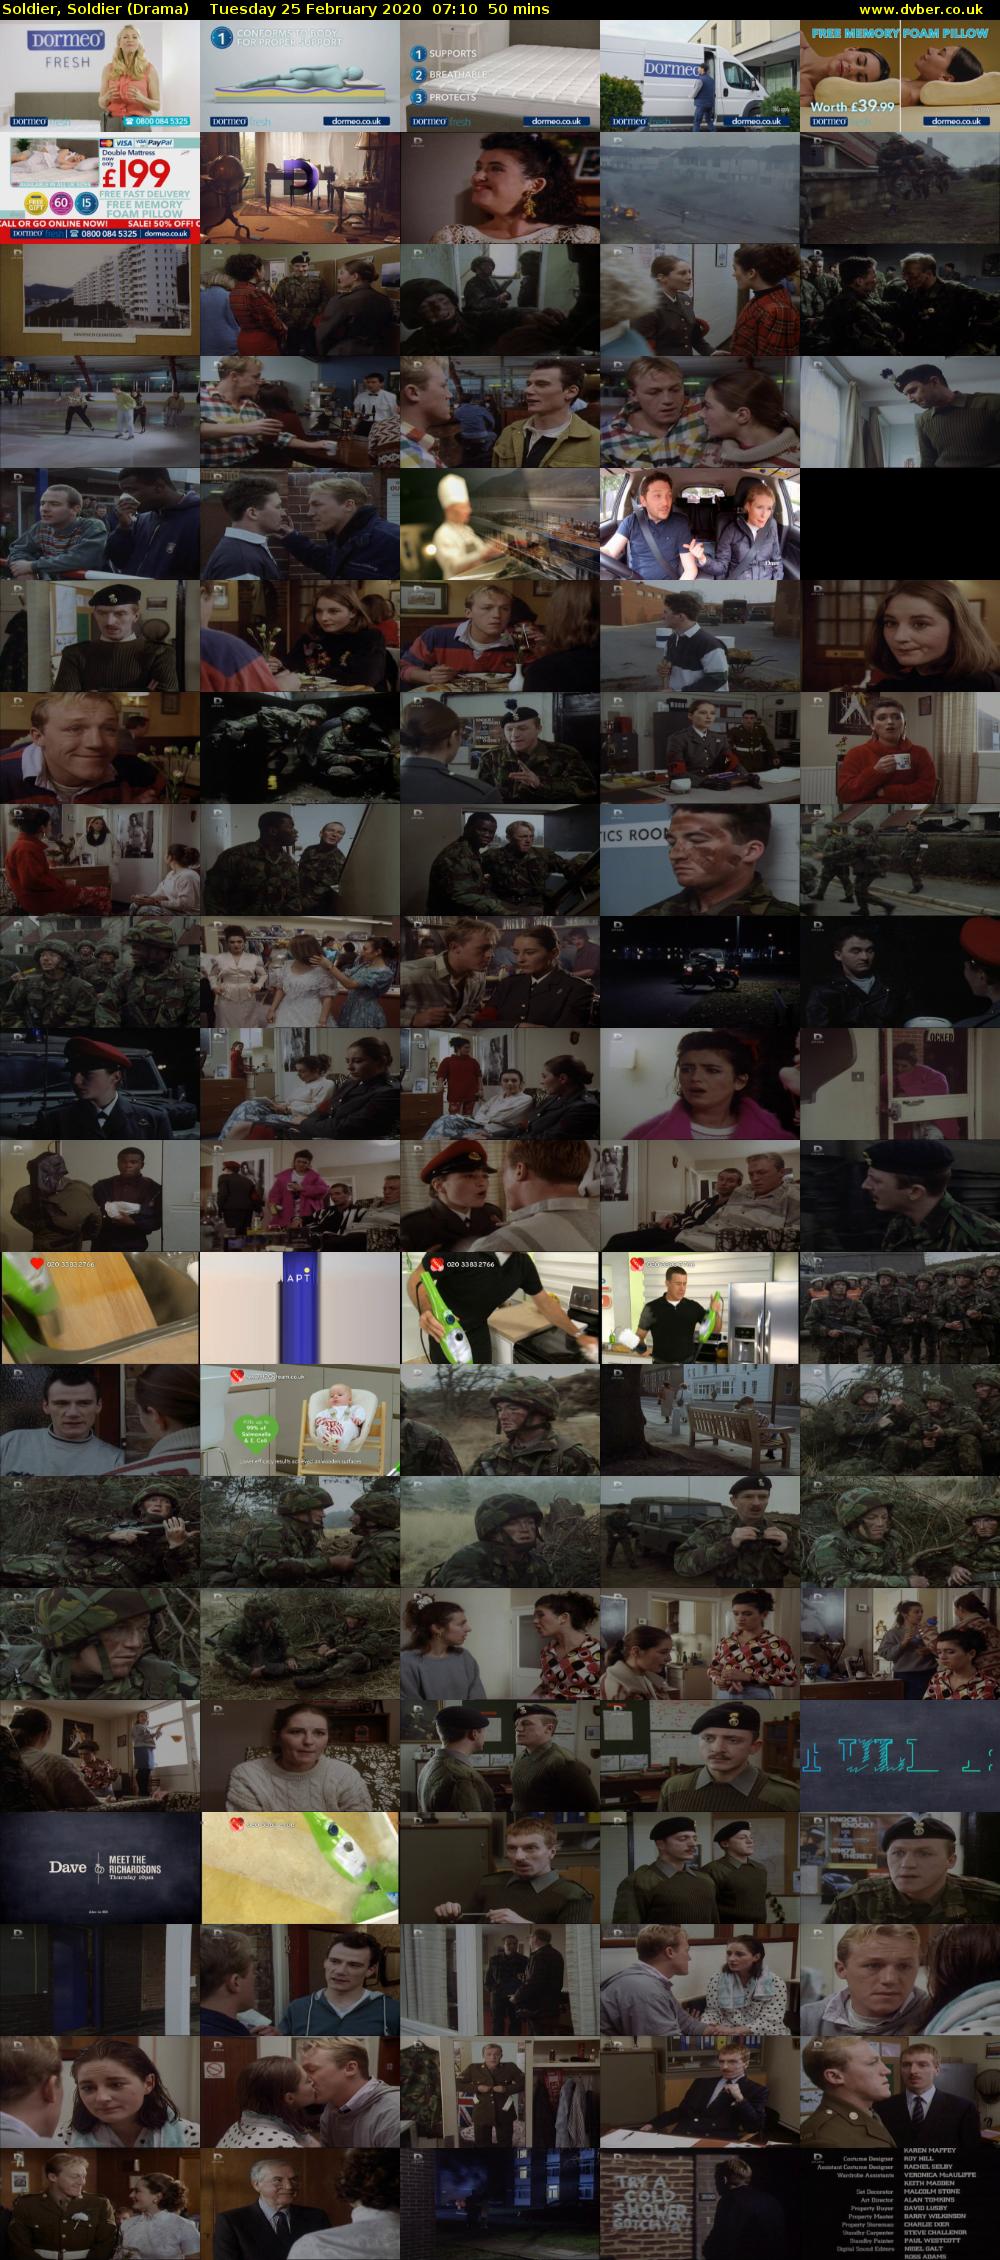 Soldier, Soldier (Drama) Tuesday 25 February 2020 07:10 - 08:00